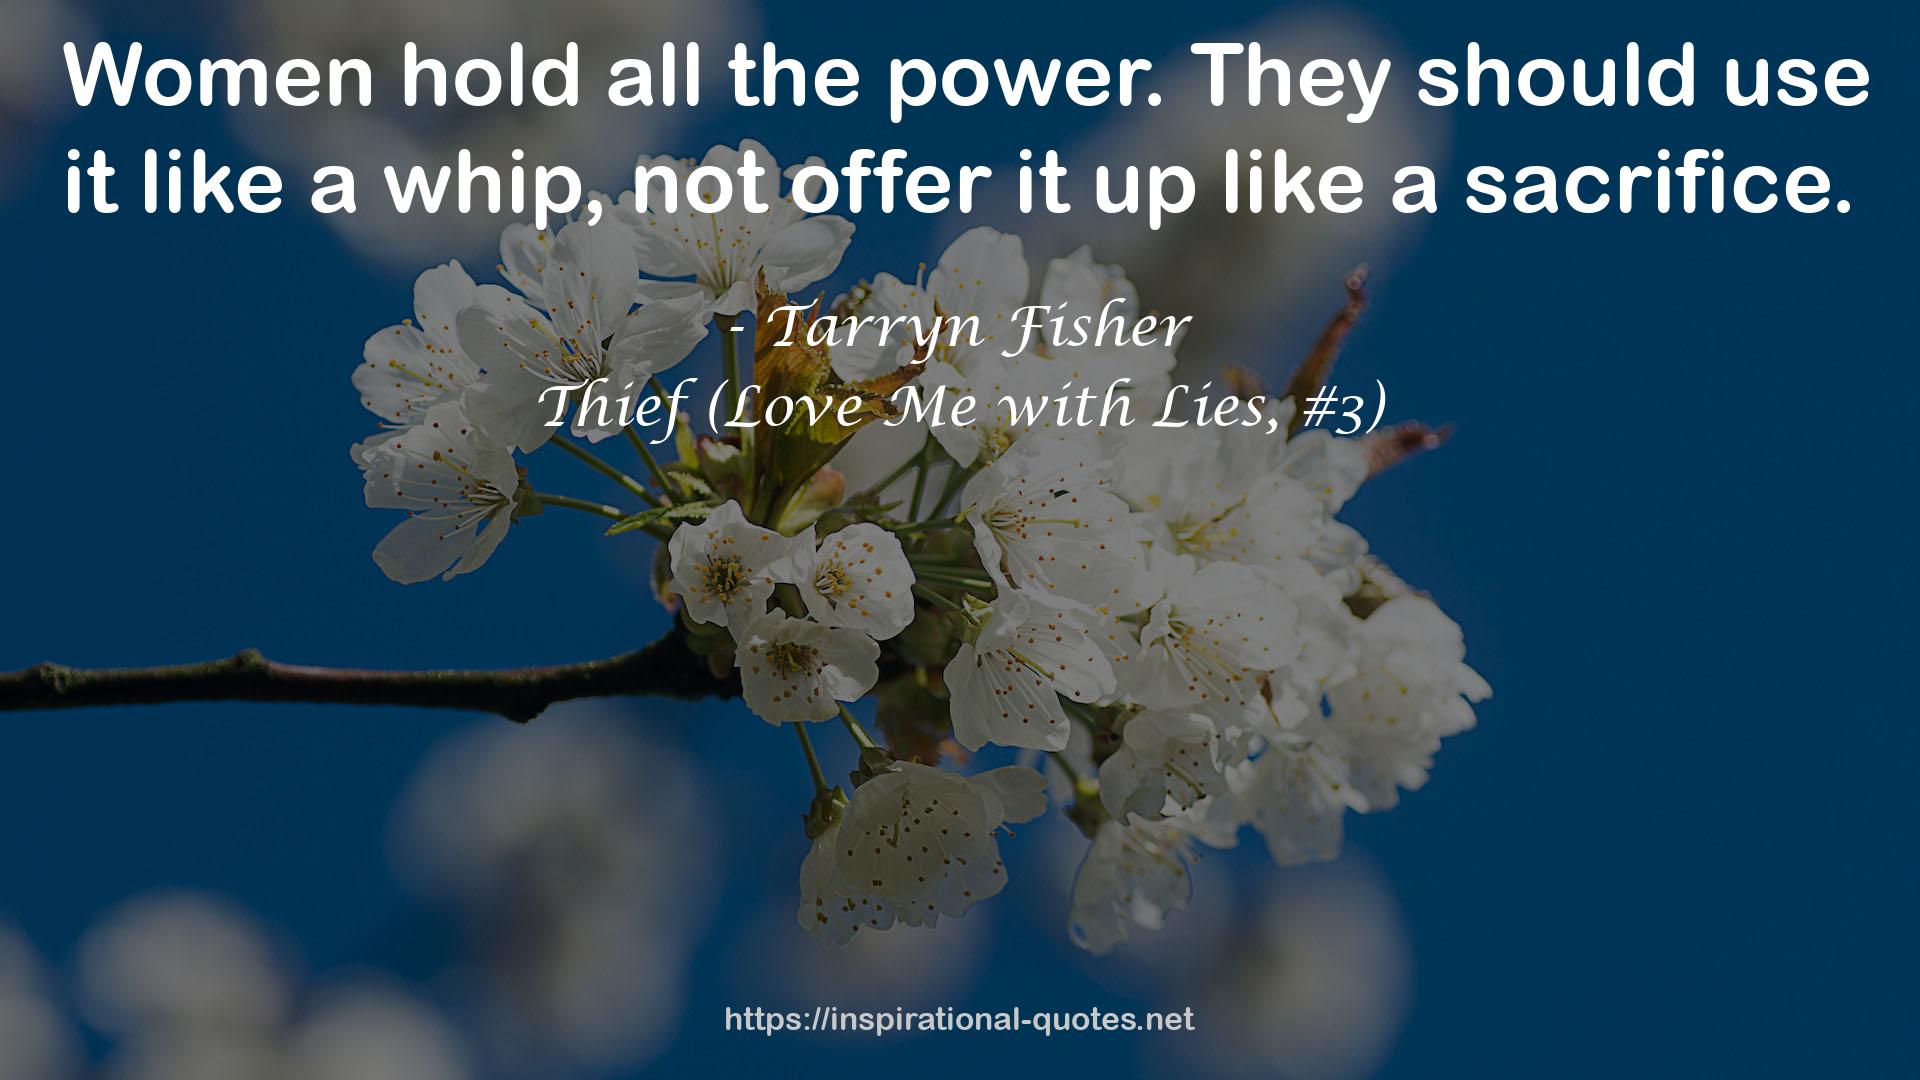 Thief (Love Me with Lies, #3) QUOTES